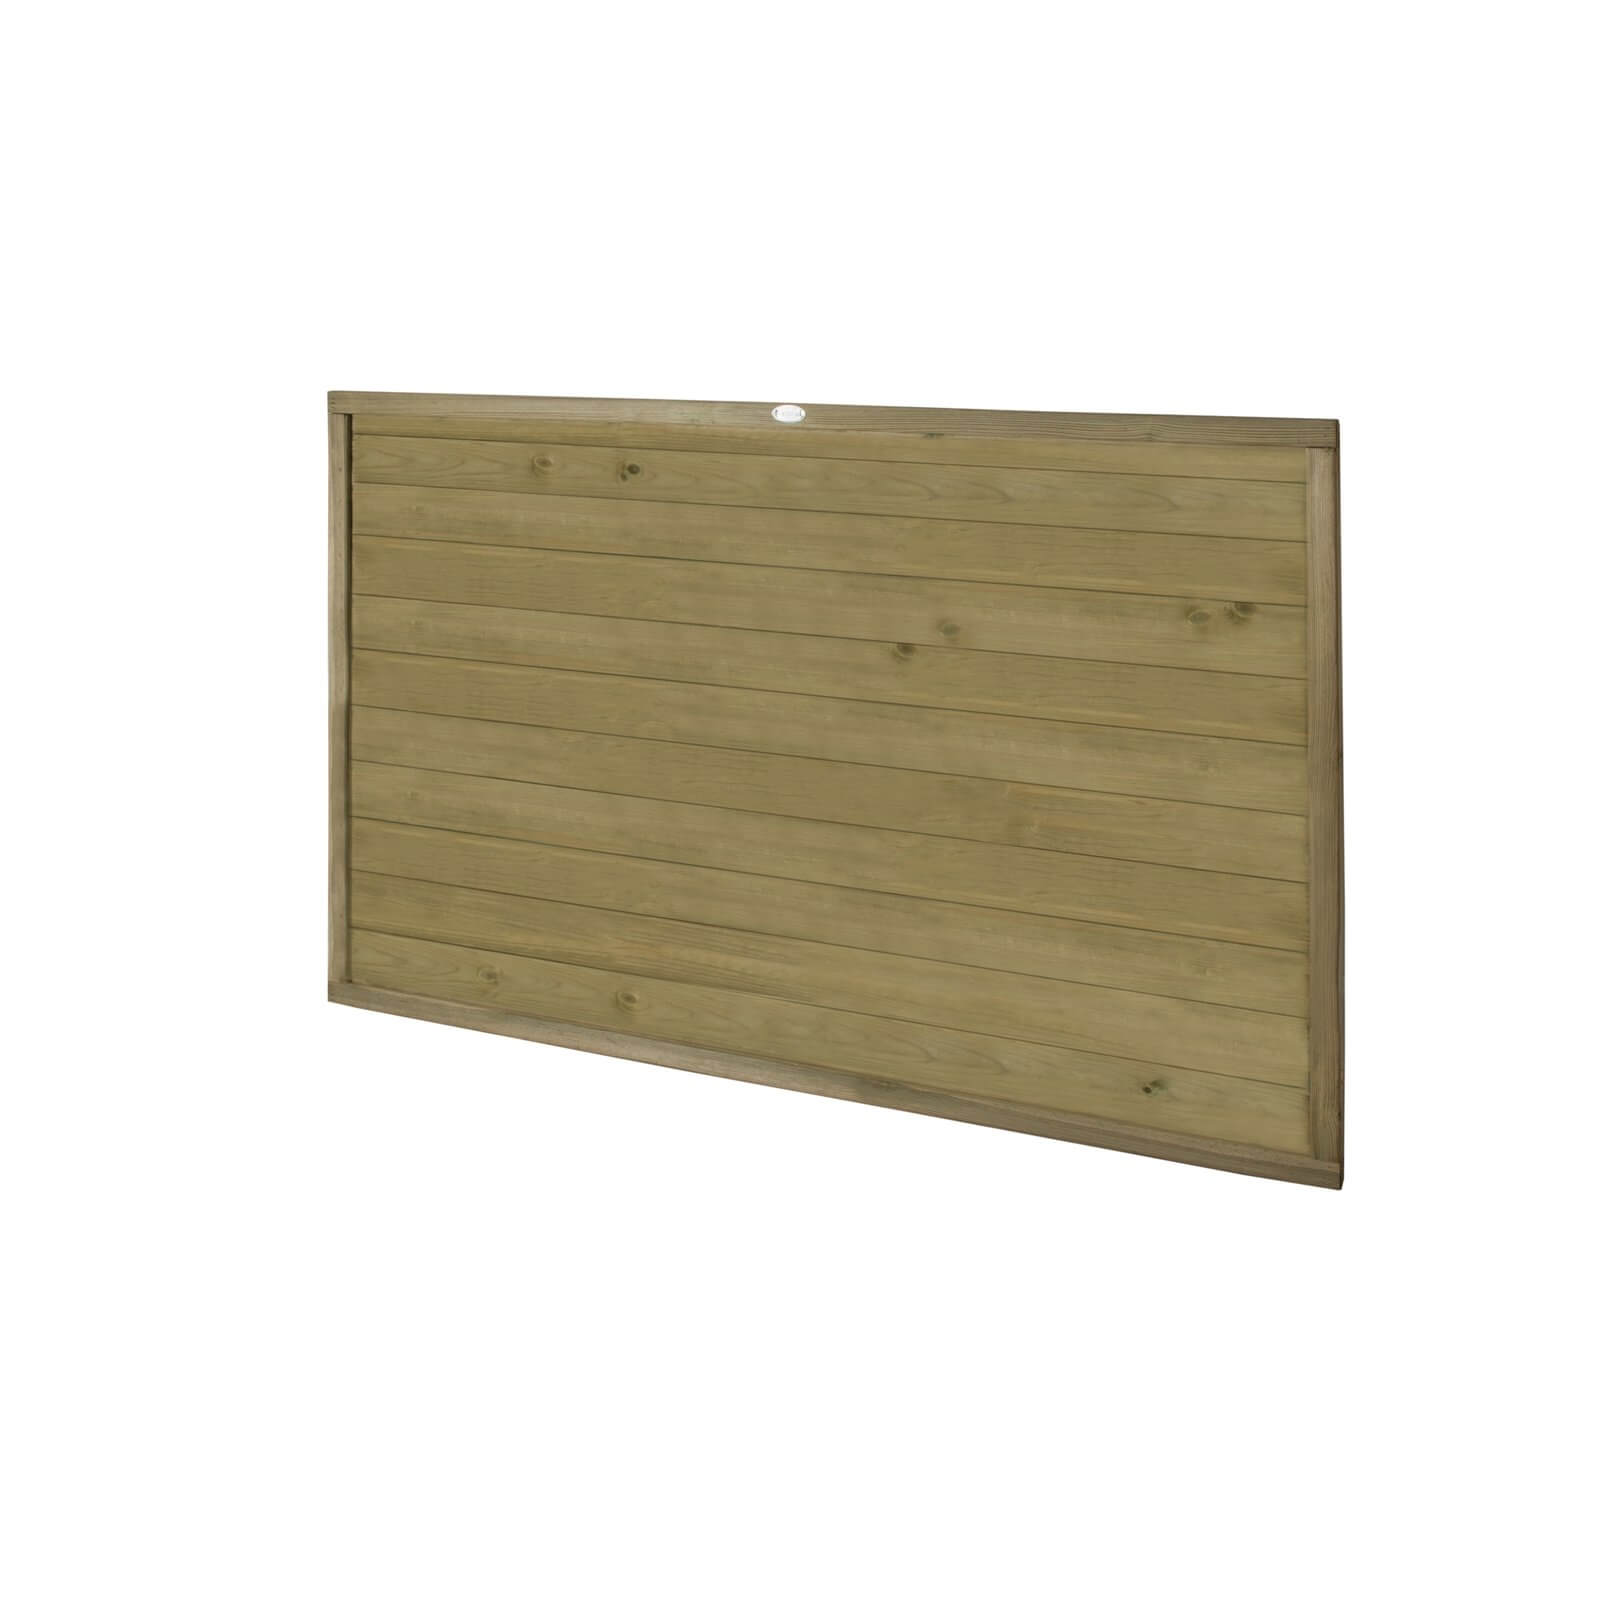 Horizontal Tongue & Groove Fence Panel - 4ft - Pack of 4